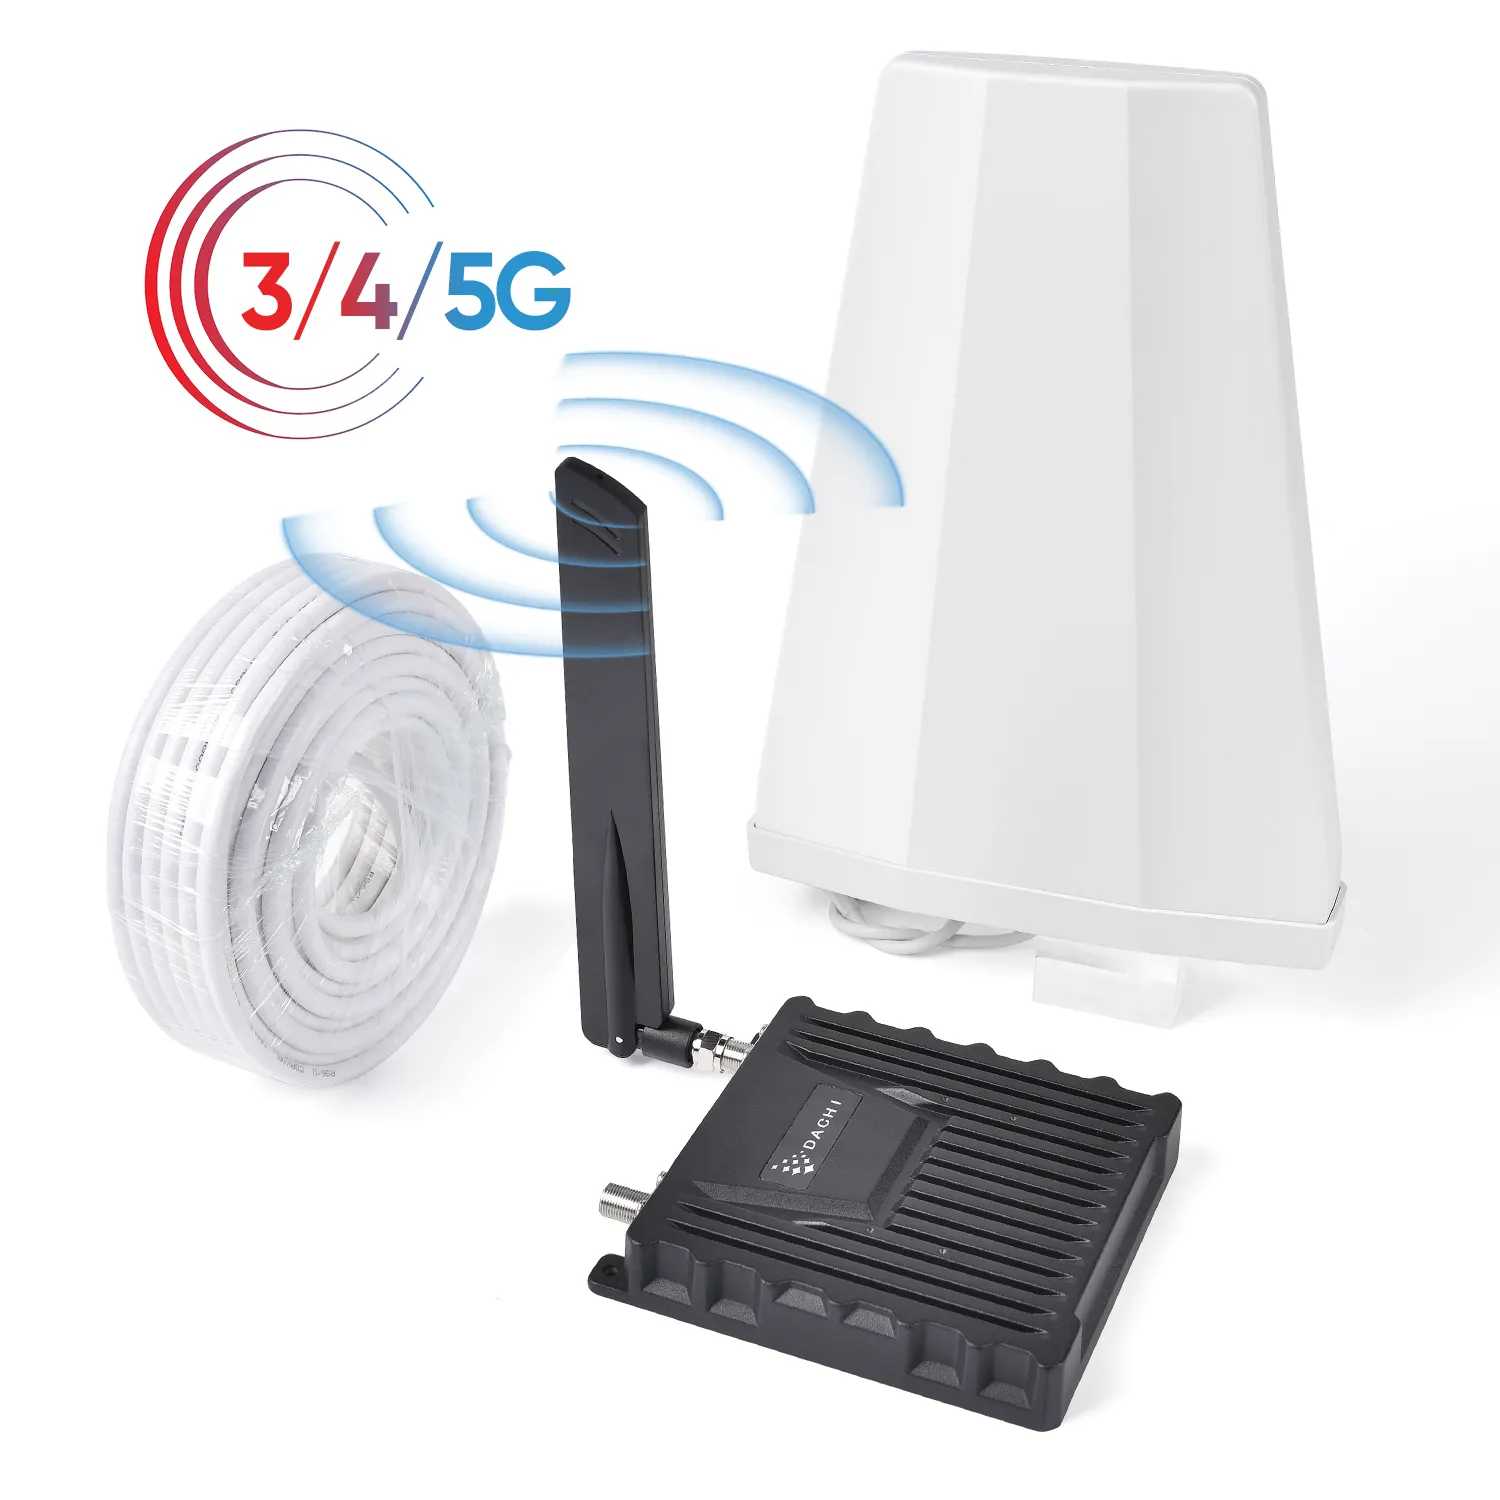 High quality mobile phone signal amplifier cellular signal repeater cell phone booster